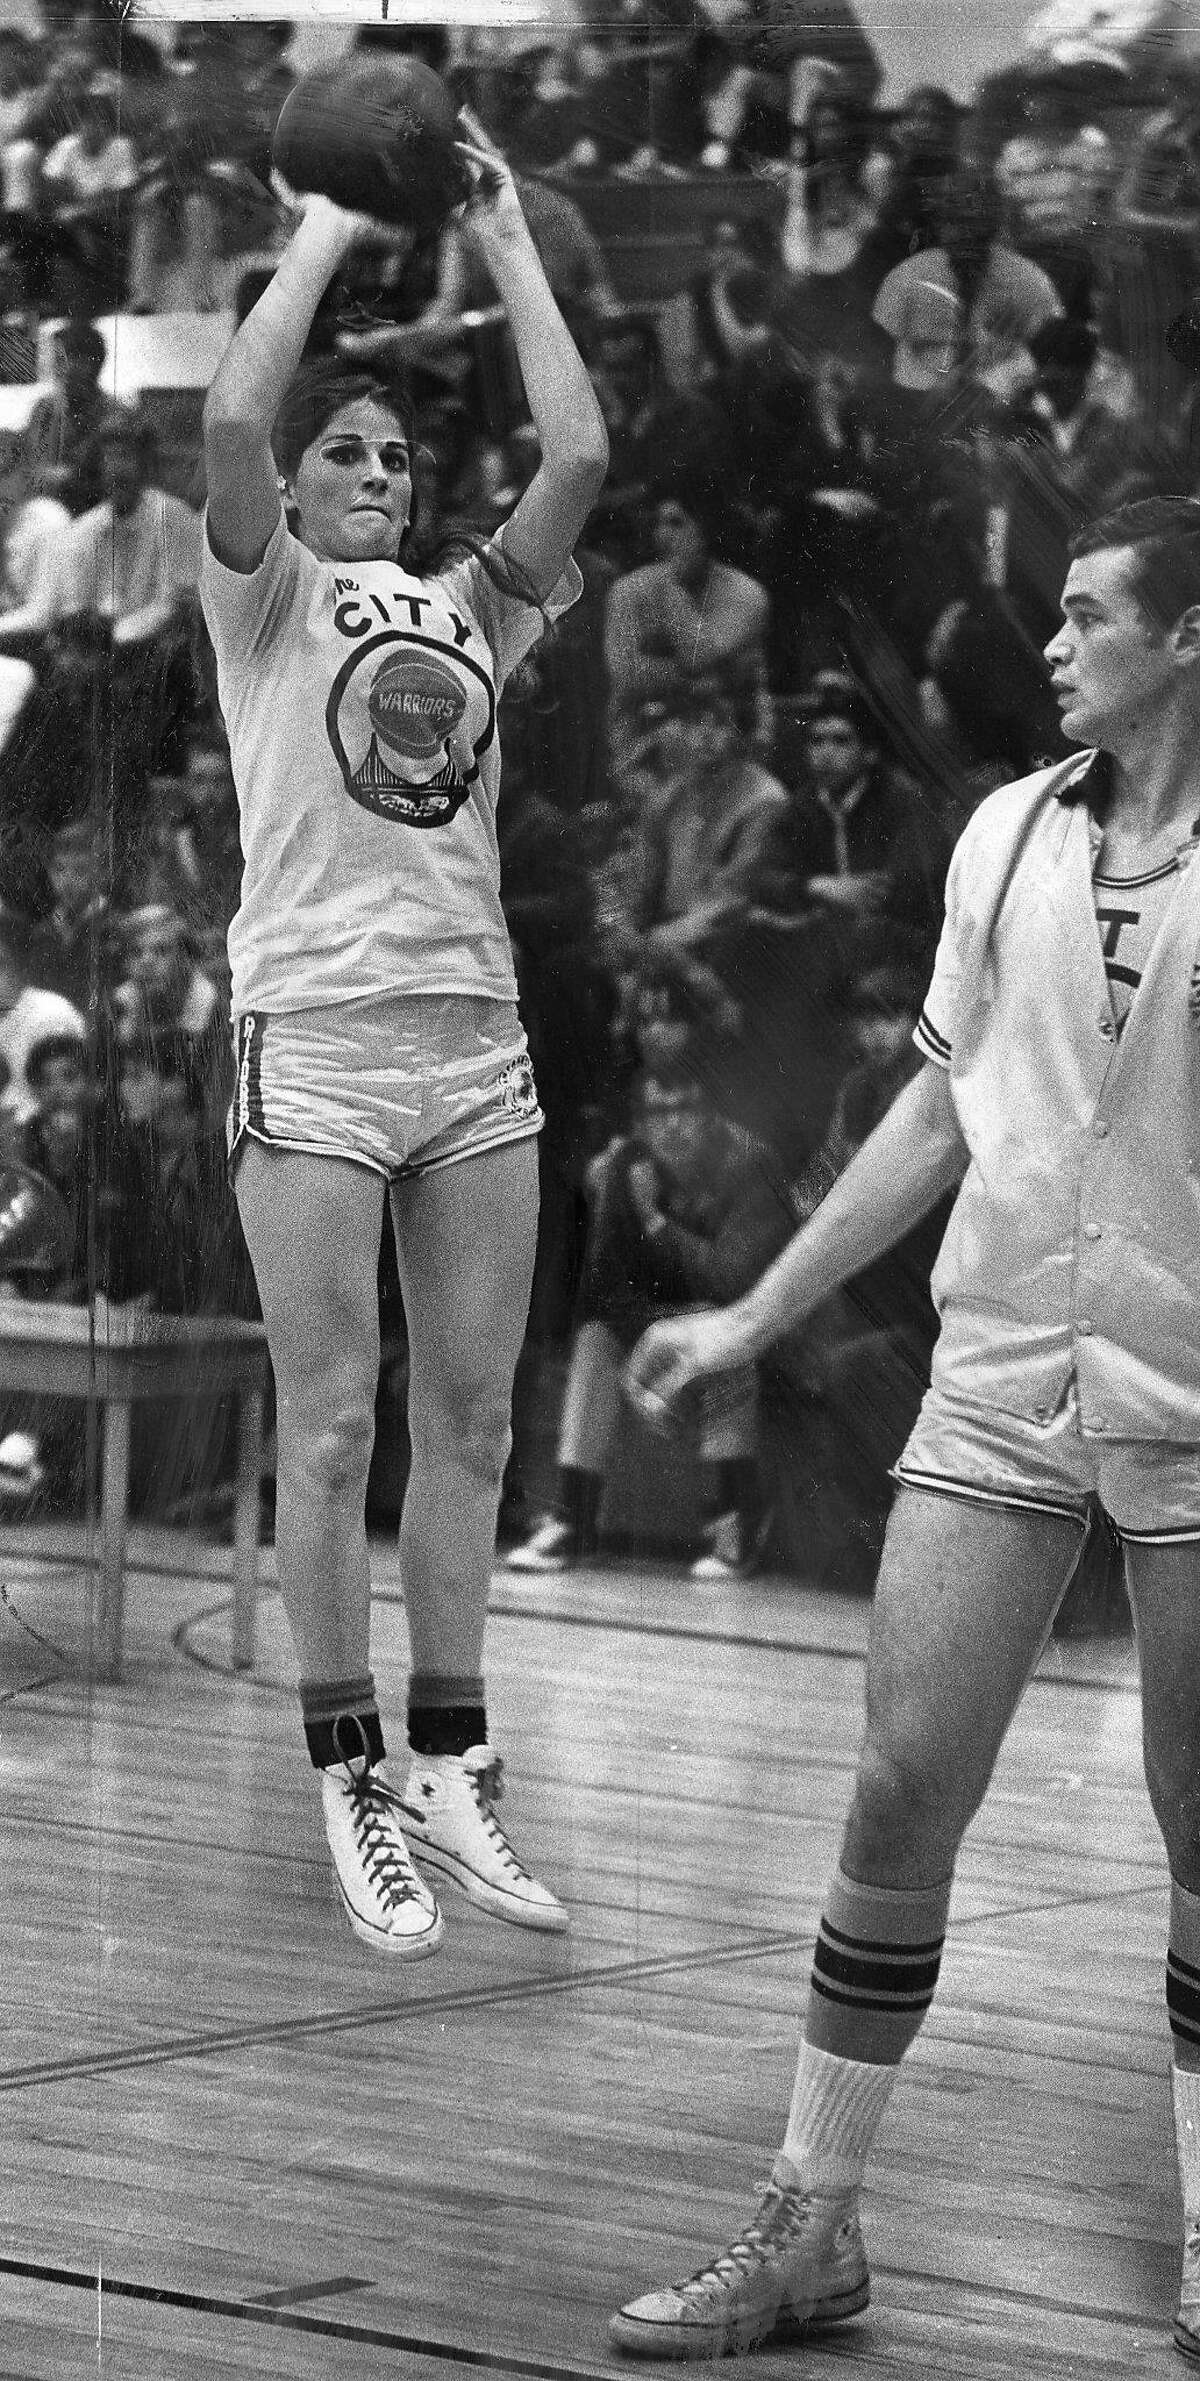 Denise Long, drafted by the Warriors in the 13th round. The NBA disallowed the pick, shown here taking a jump shot, July 1969 Photo ran 08/01/1969, p. 53